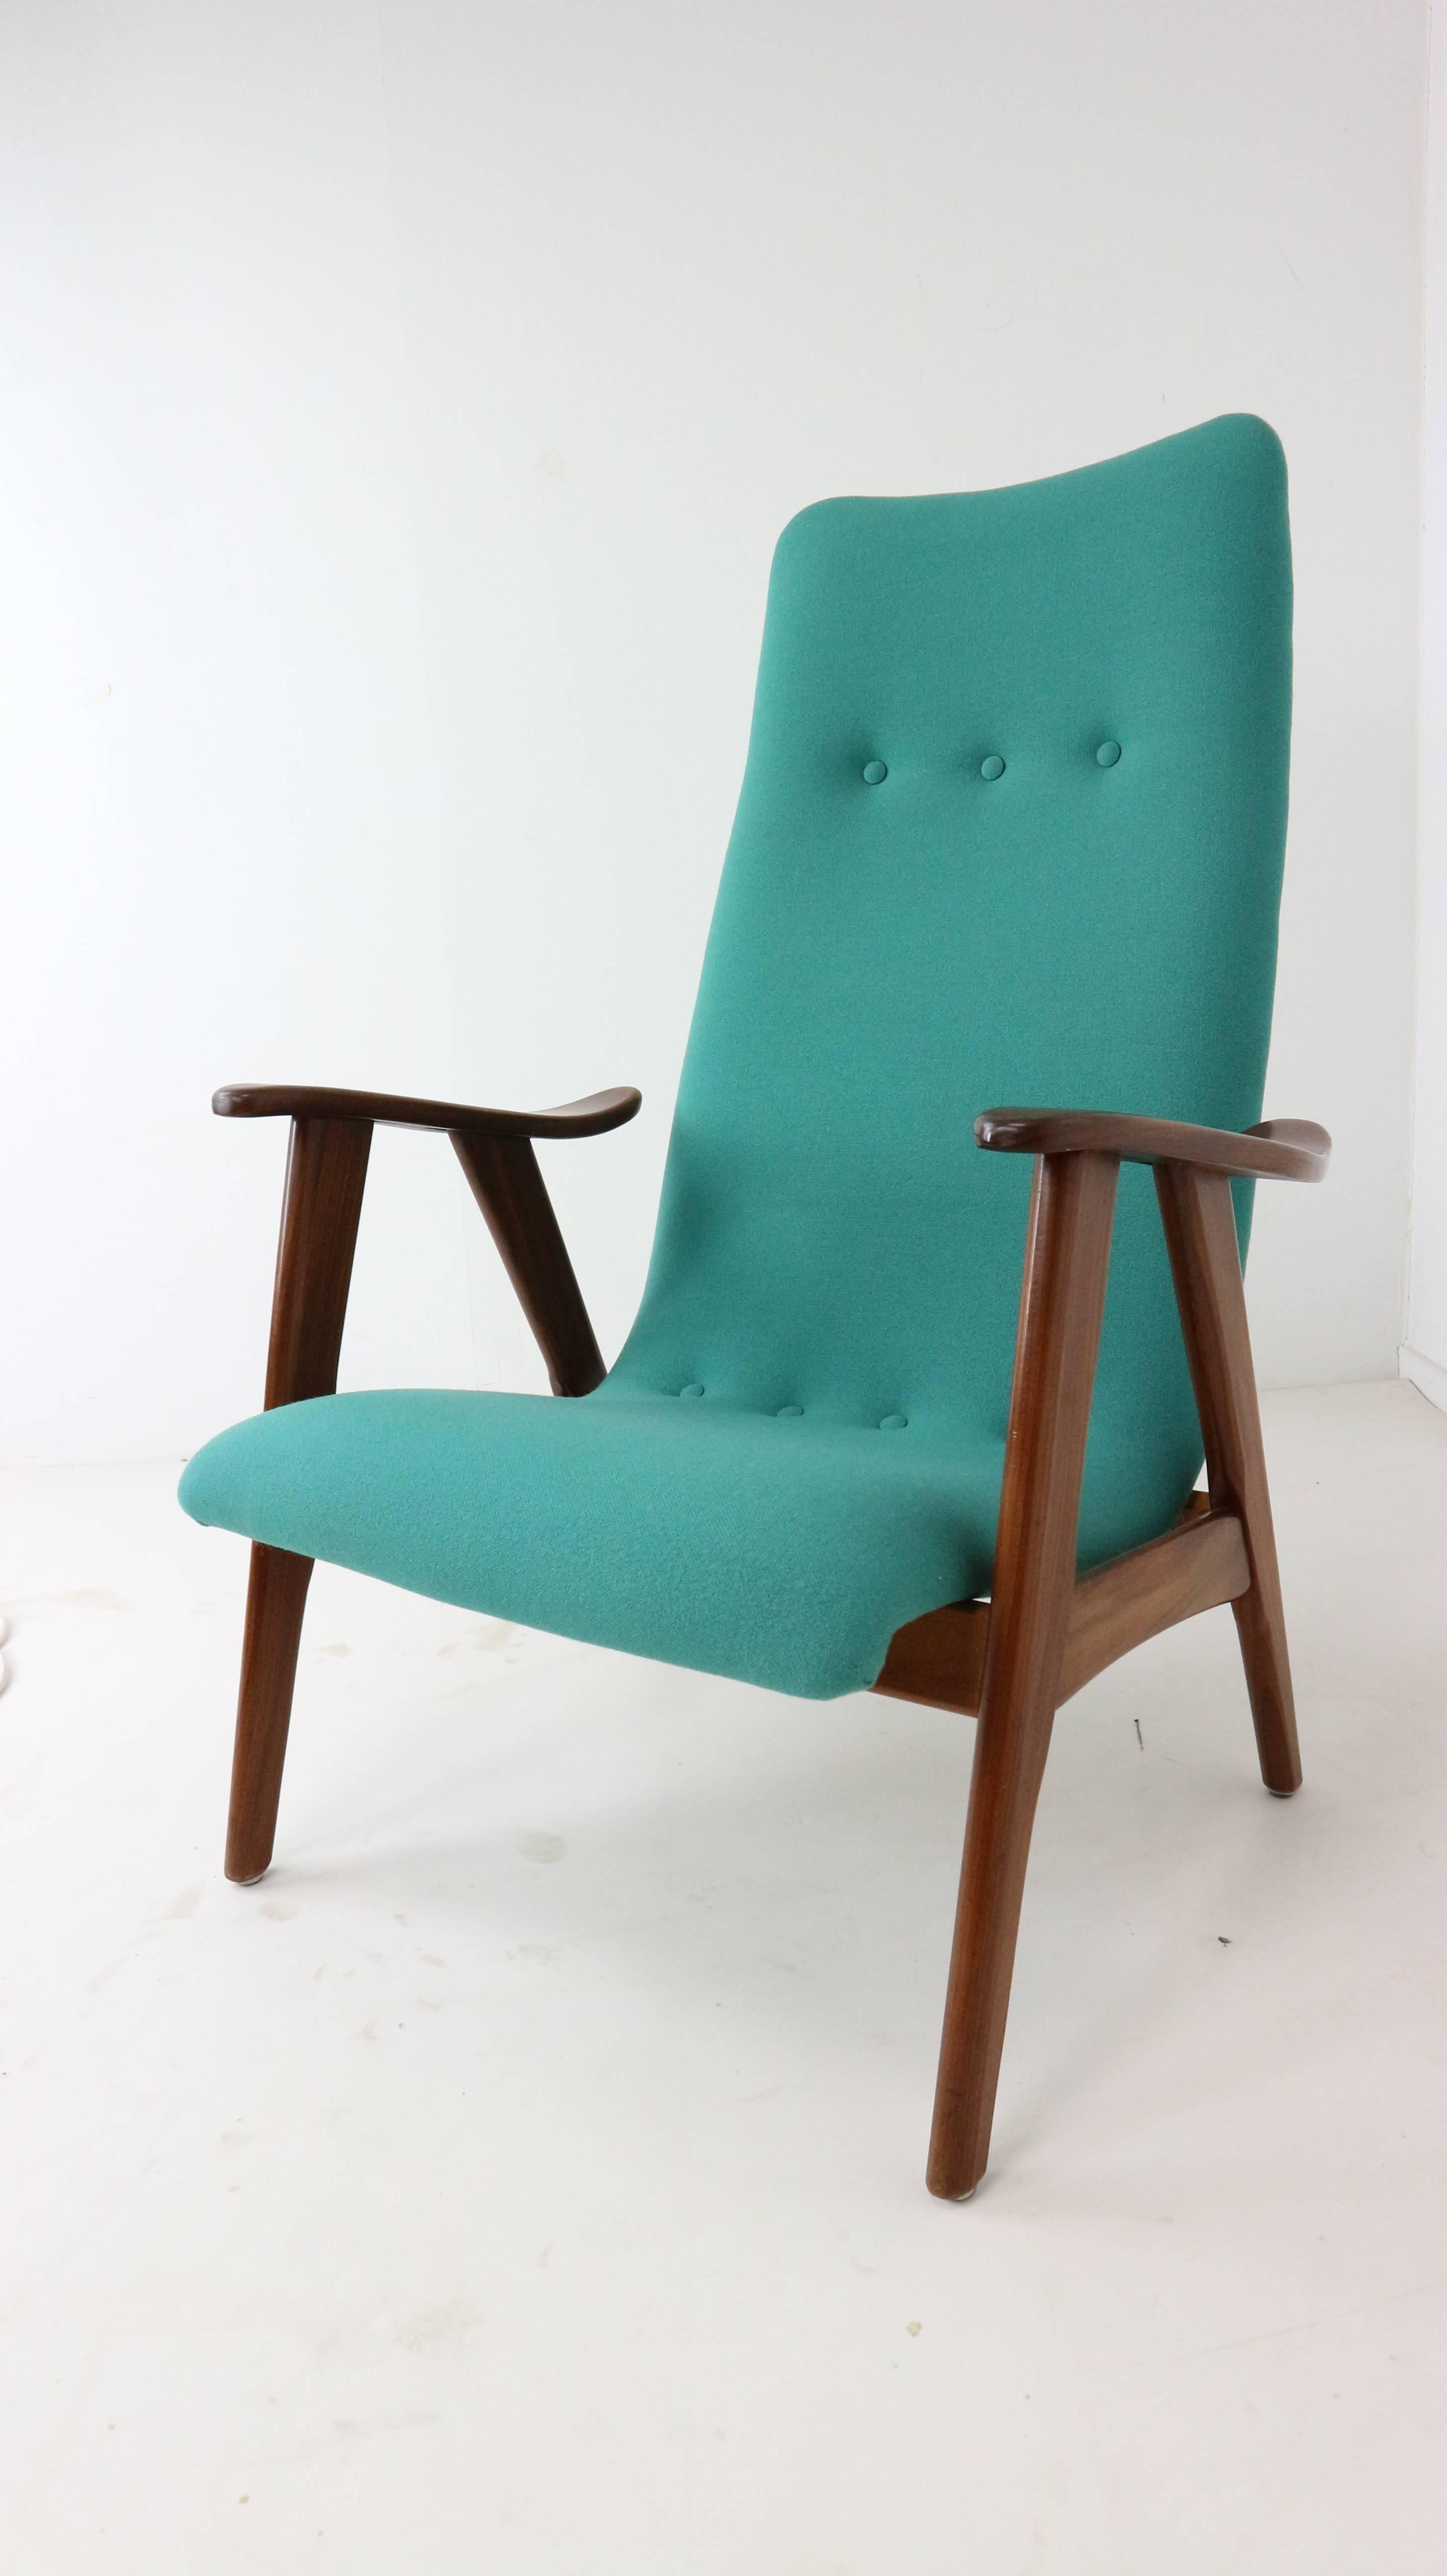 This lounge chair comes with a beautiful organic shaped teak frame, in newly upholstered turquoise Kvadrat fabric. This chair remains in excellent condition with minor signs of wear.